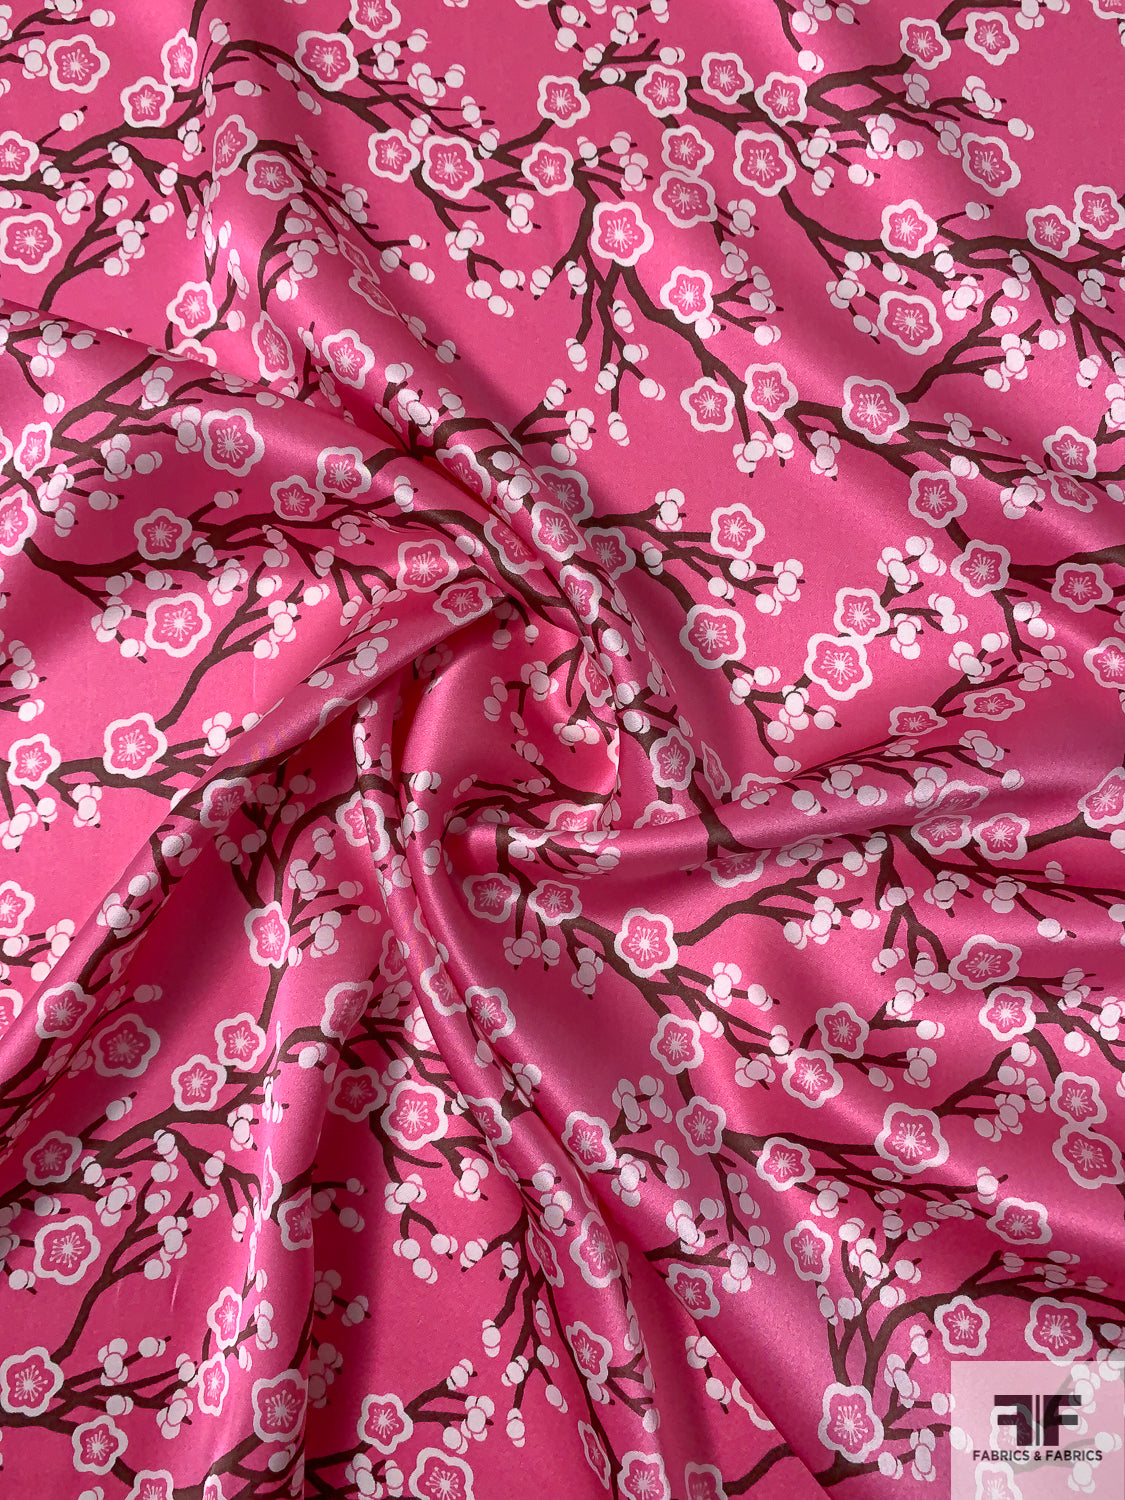 Floral Branches Printed Silk Charmeuse - Bubblegum PInk / Brown / White